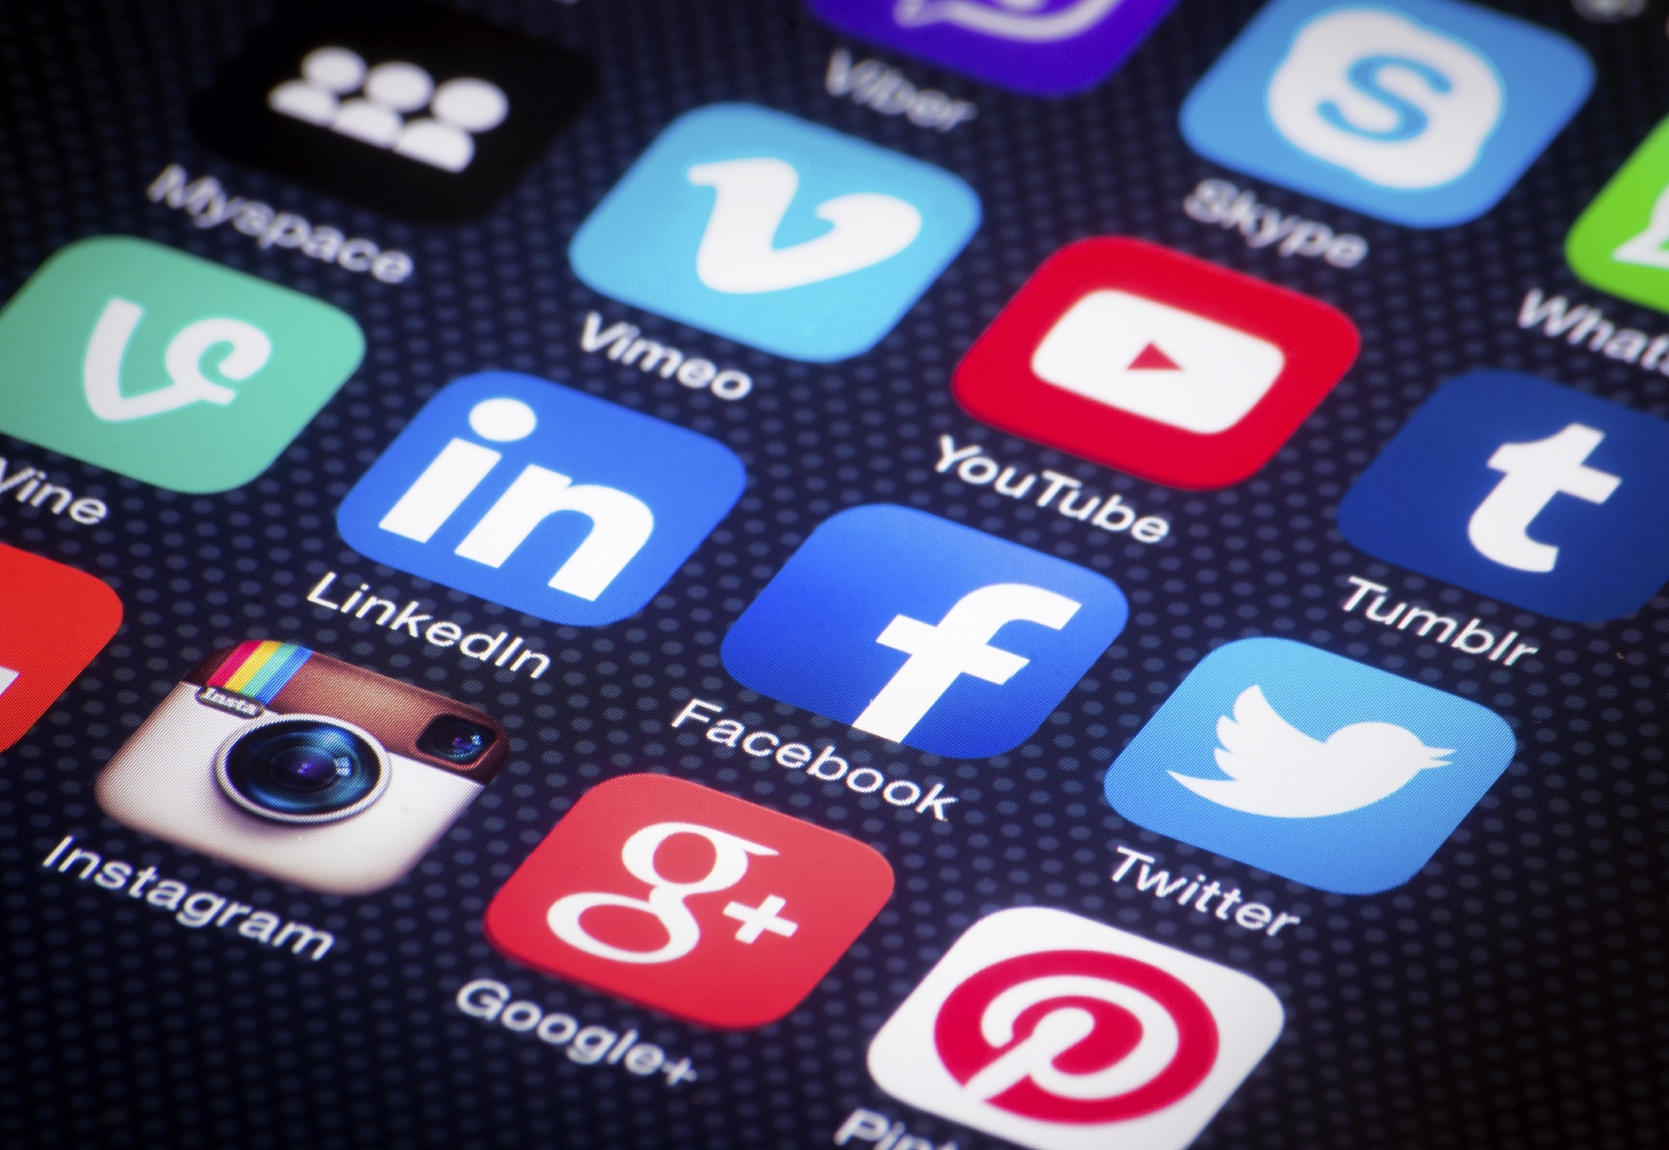 Social media hype or substance? Are Twitter and Facebook relevant to business owners?